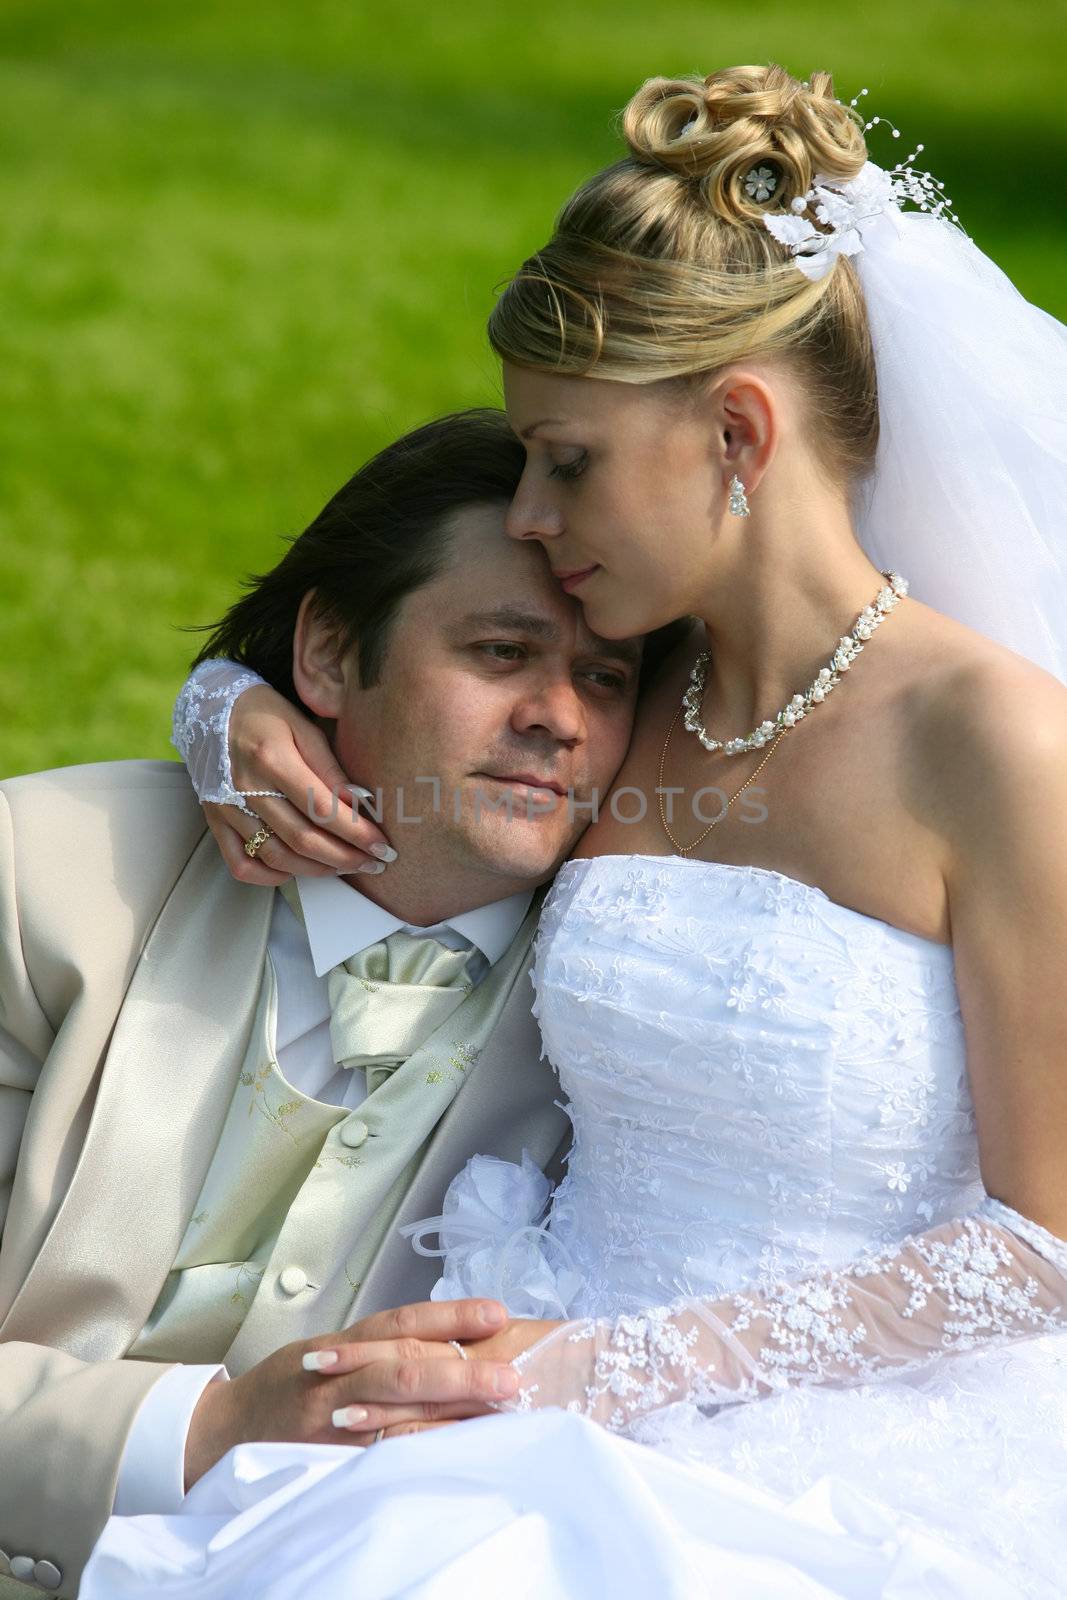 Recently married pair sits on a grass in park